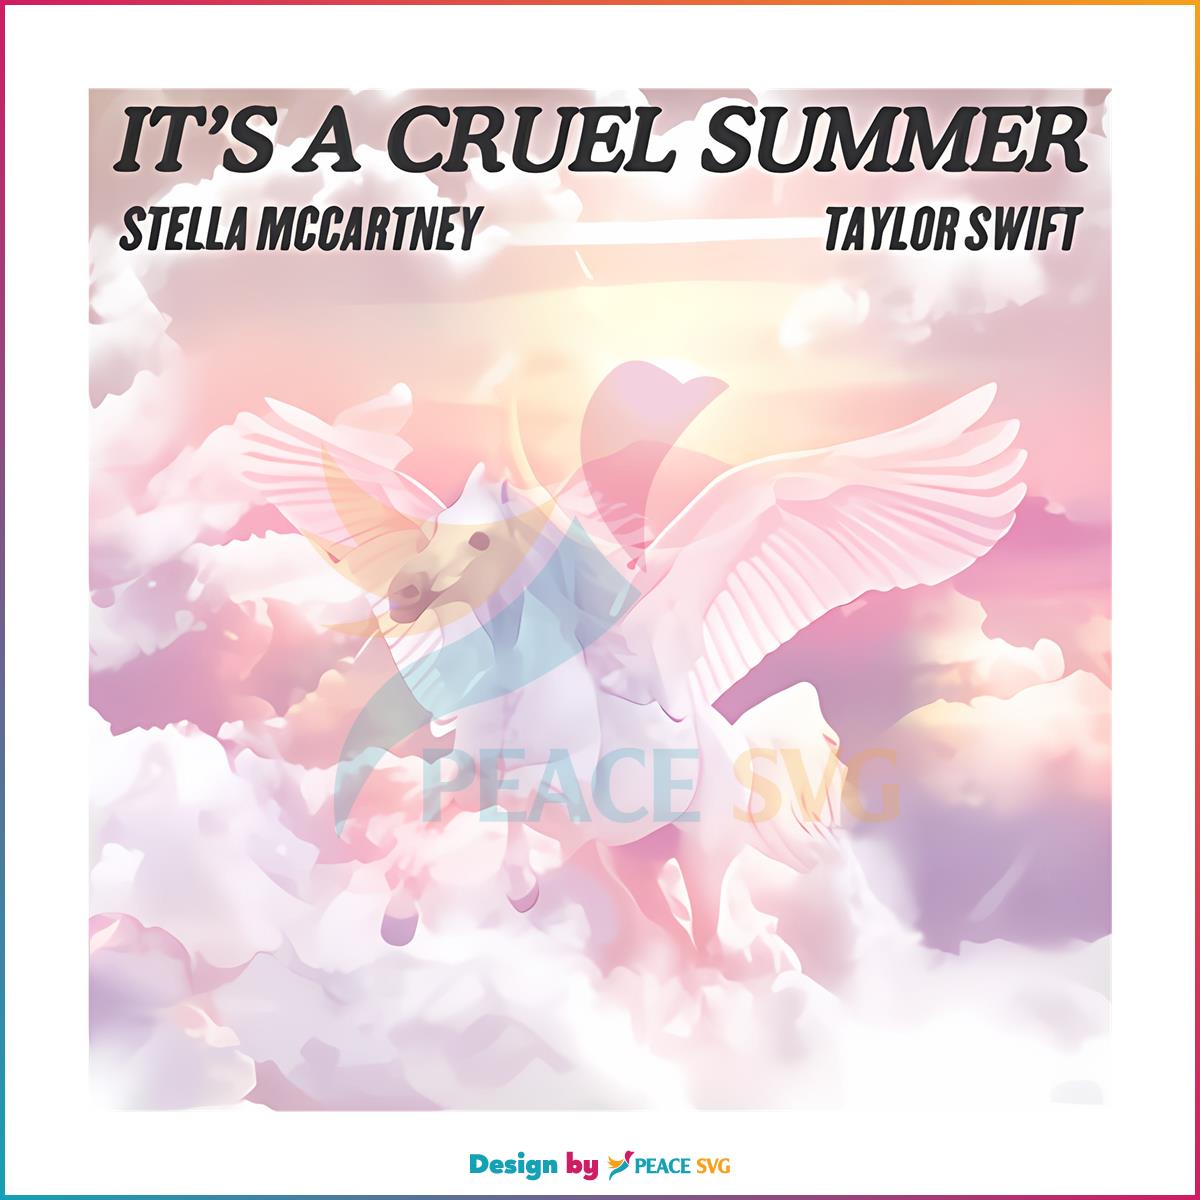 Stella McCartney x Taylor Swift With Winged Horse PNG